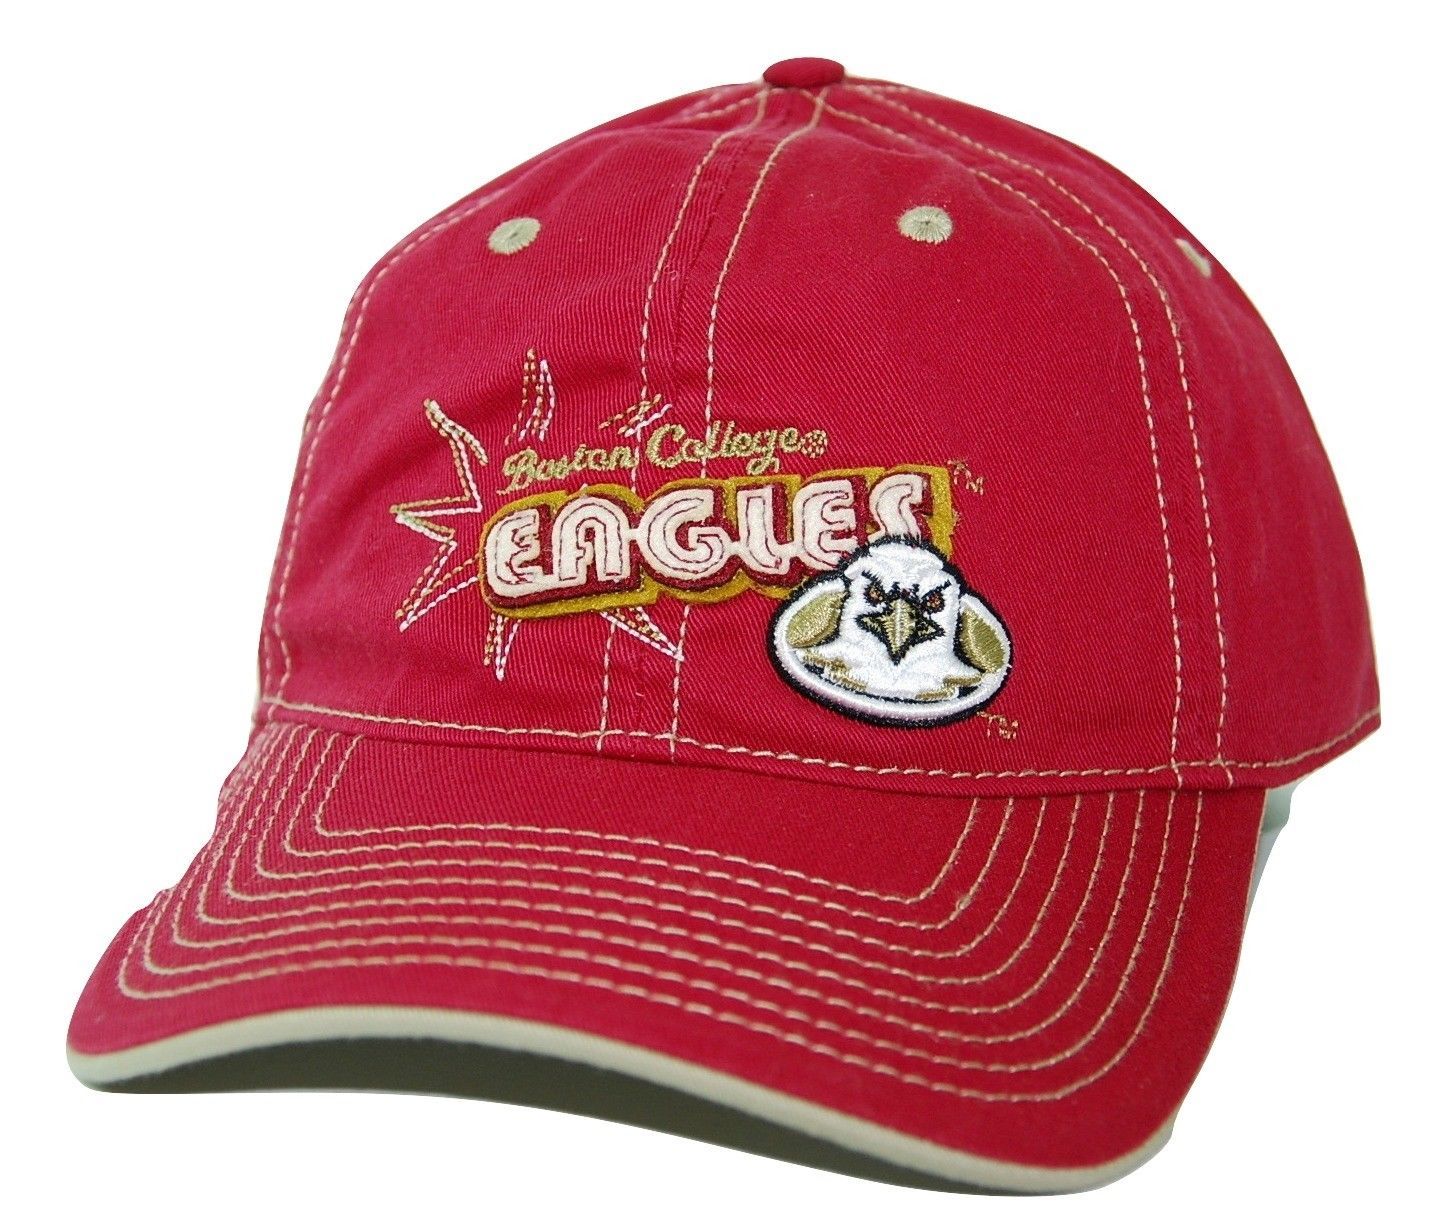 Boston College Eagles NCAA Team Contrast Stitch Adjustable Red Cap Hat - $12.34